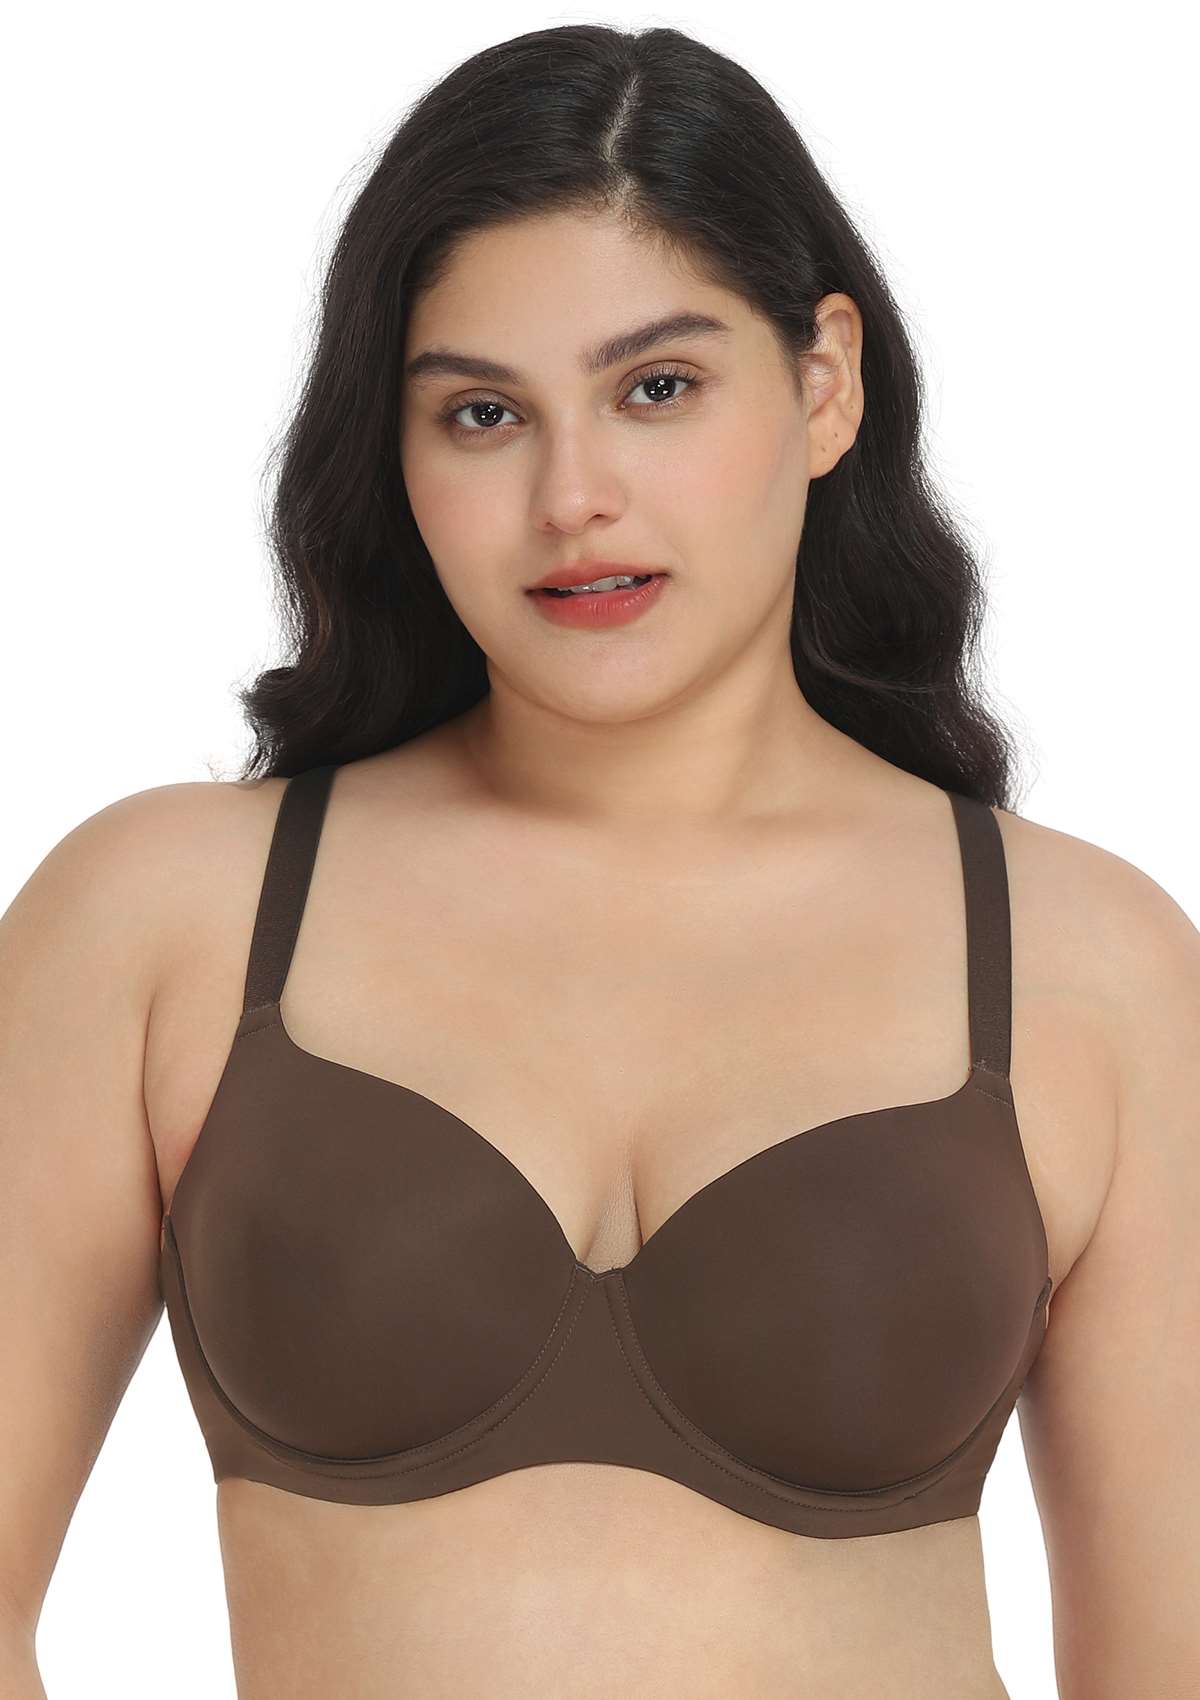 HSIA Gemma Smooth Supportive Padded T-shirt Bra - For Full Figures - Cocoa Brown / 42 / D